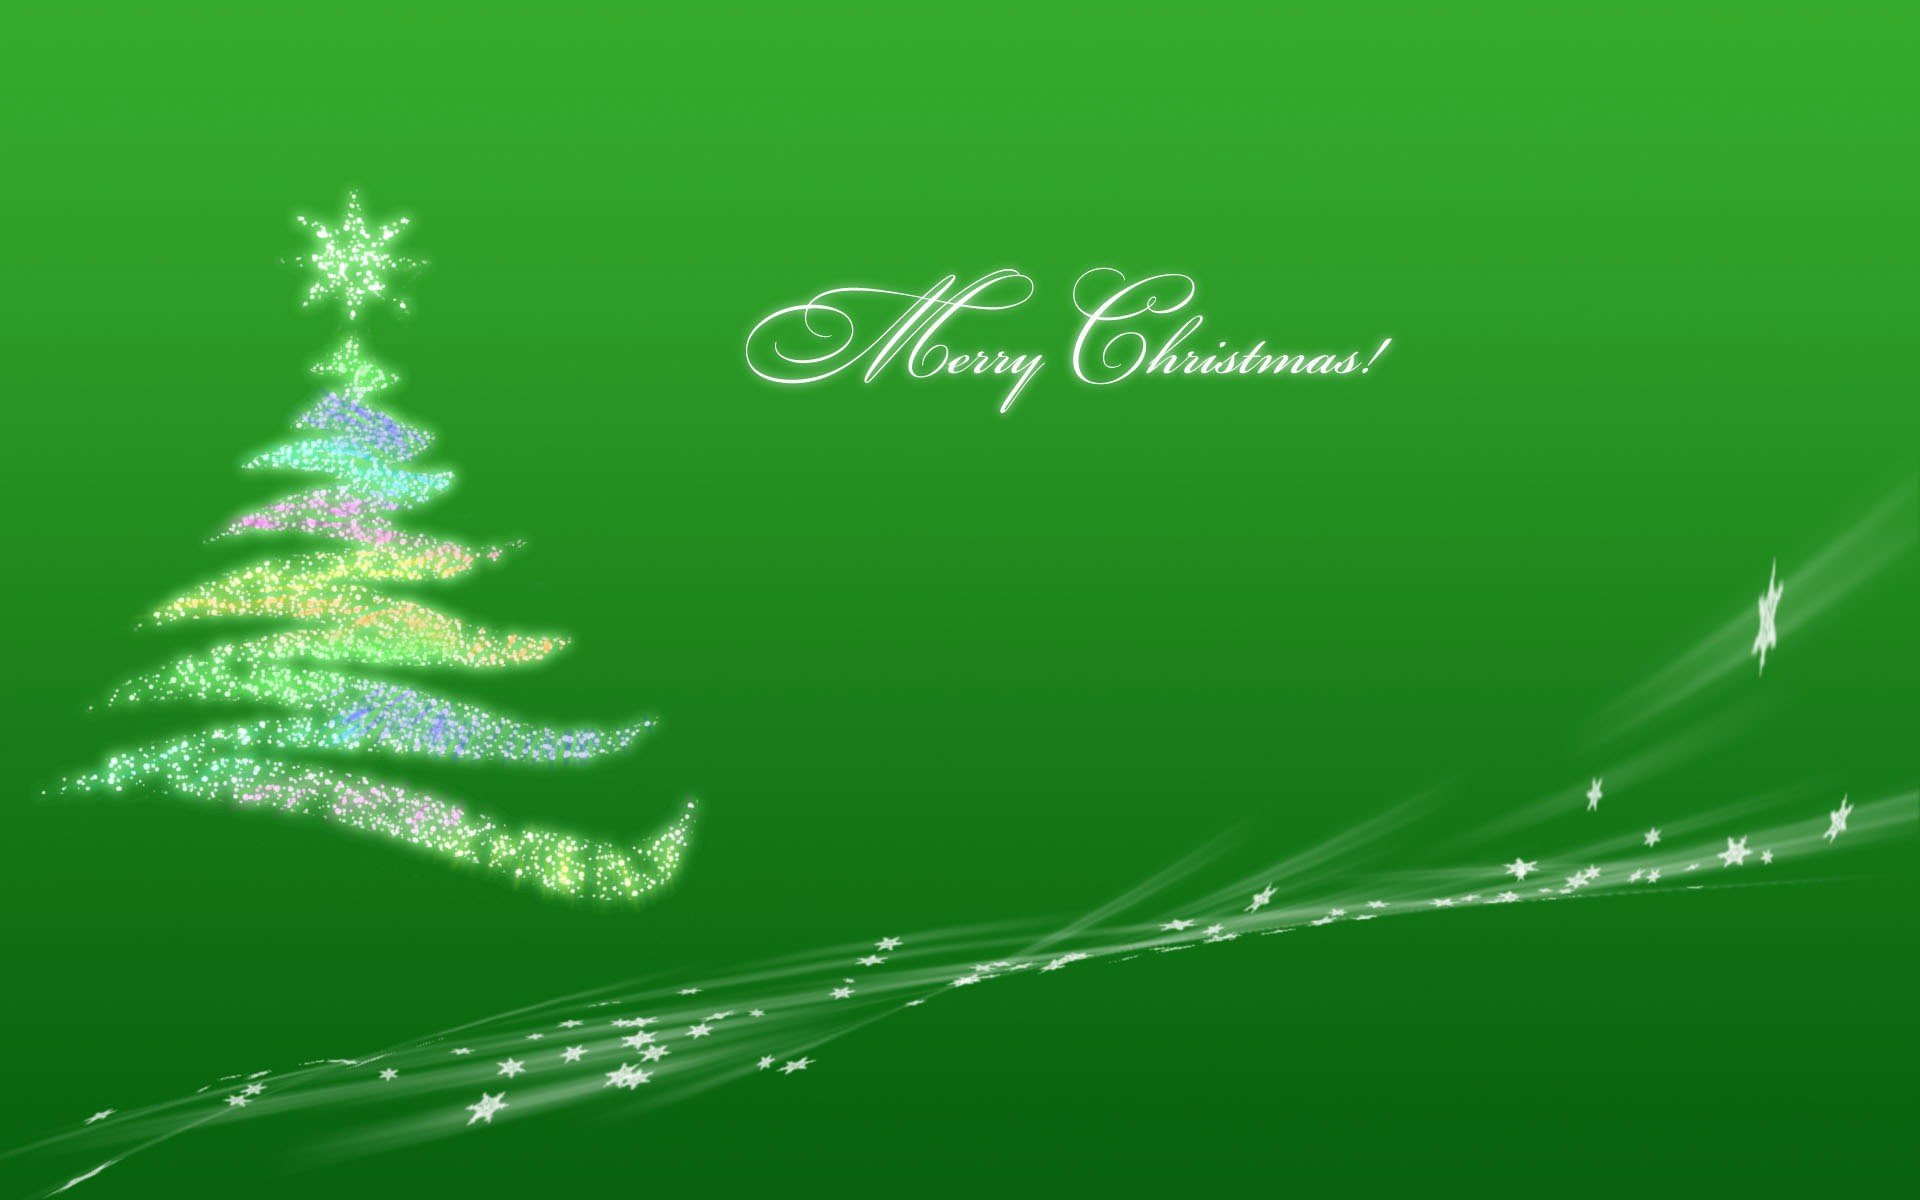 green, Nature, Christmas, Christmas, Trees, Simple, Background, Green, Background, X mas, Tree Wallpaper